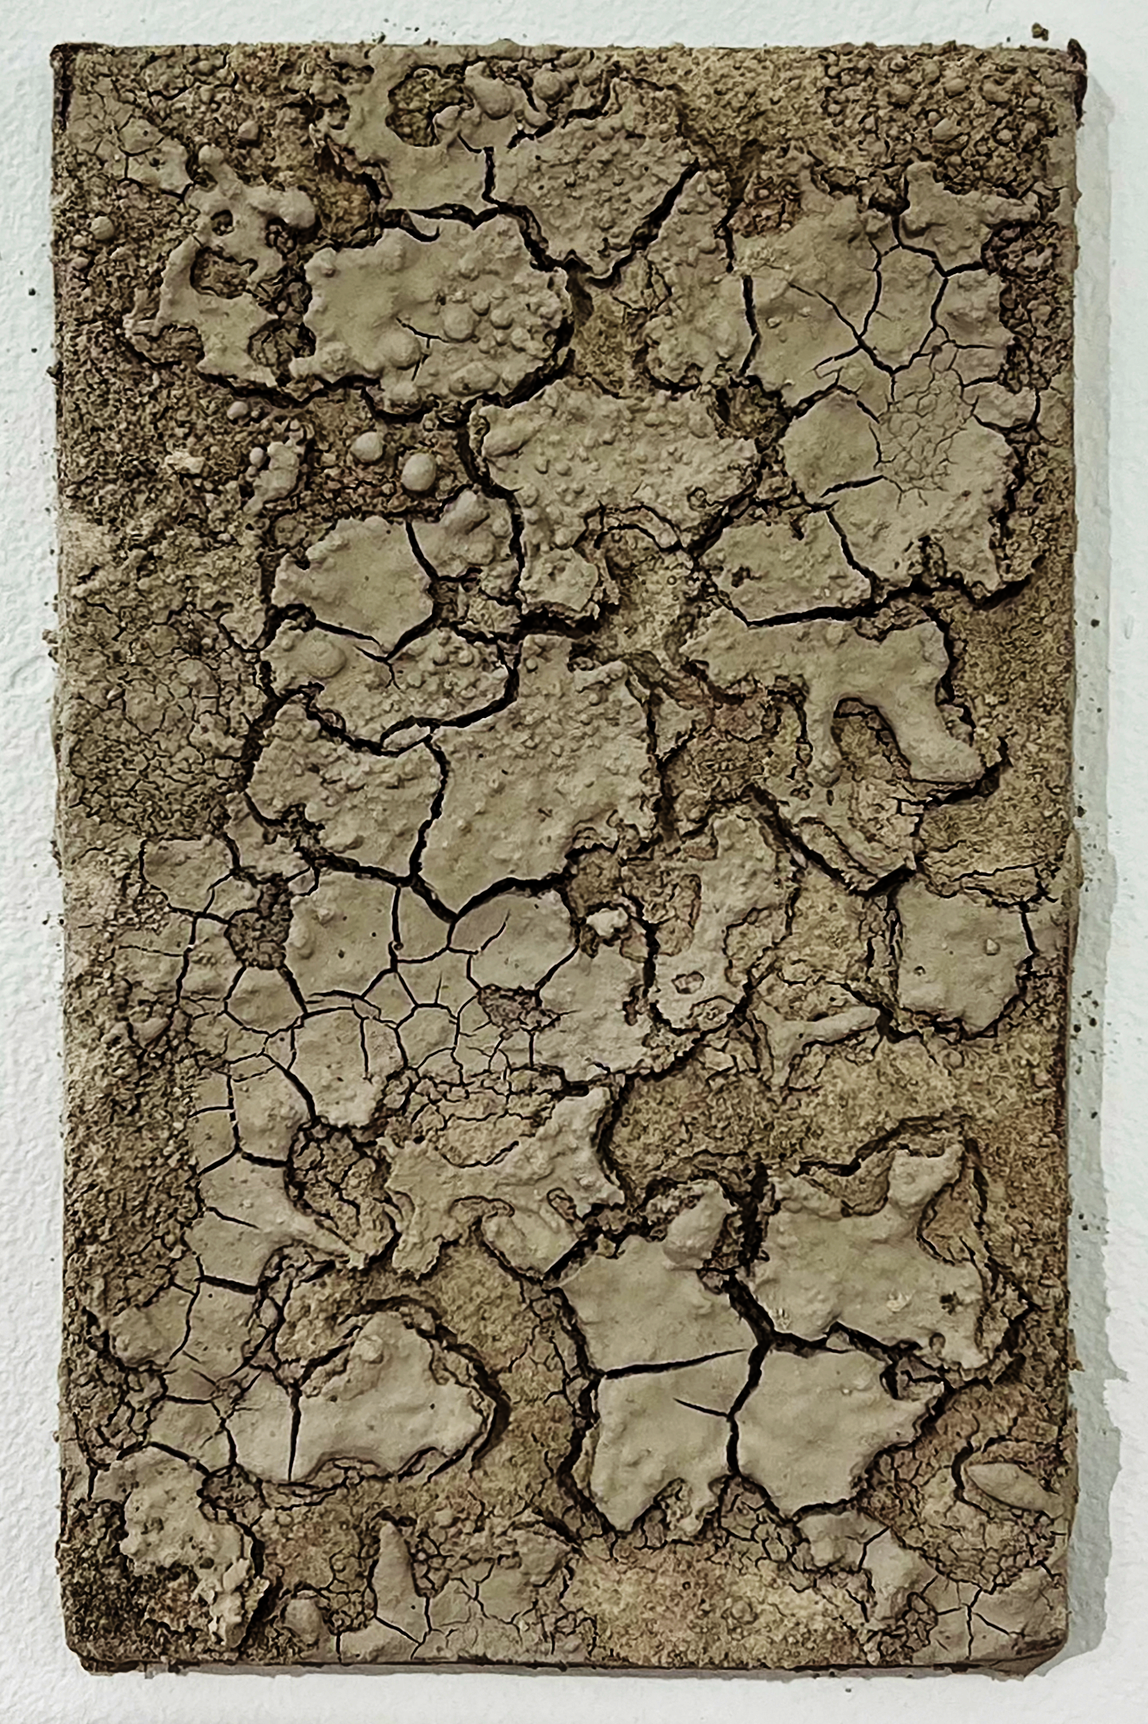 Beige clay tile with a heavily cracked and rough surface texture